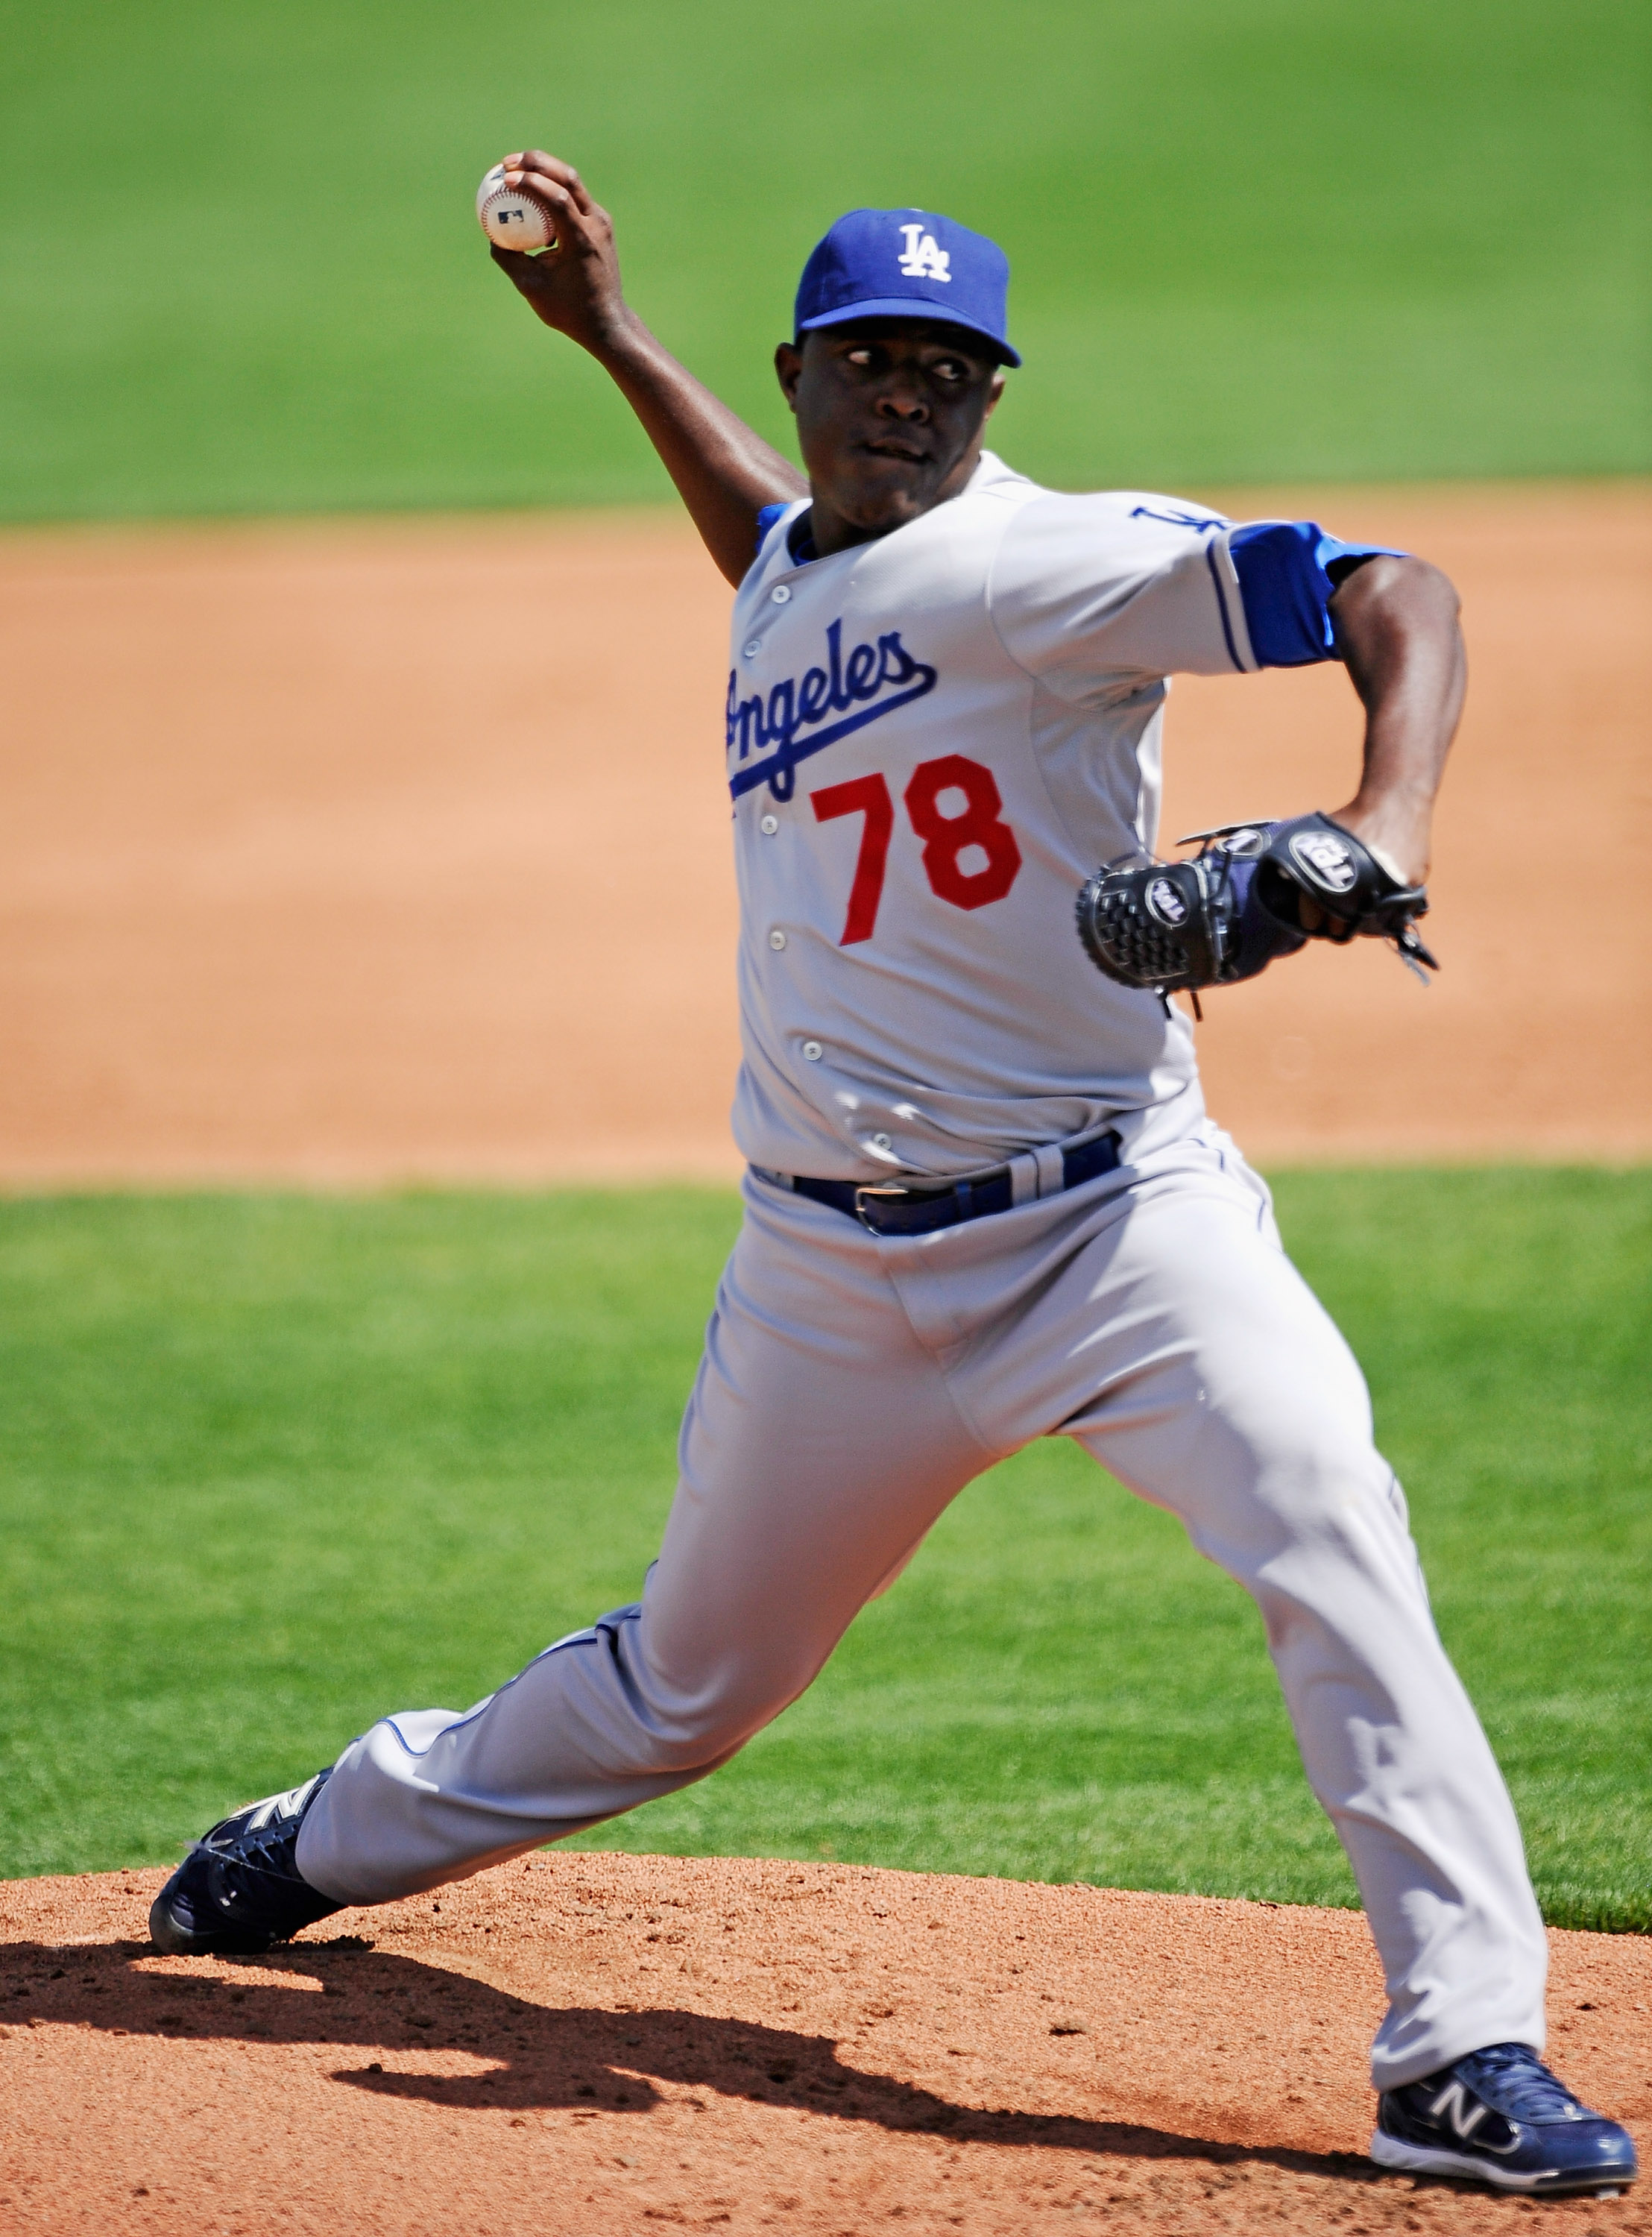 SCOTTSDALE, AZ - MARCH 18:  Pitcher Rubby De La Rosa #78 of the Los Angeles Dodgers throws against the San Francisco Giants during the spring training baseball game at Scottsdale Stadium on March 18, 2011 in Scottsdale, Arizona.  (Photo by Kevork Djansezi